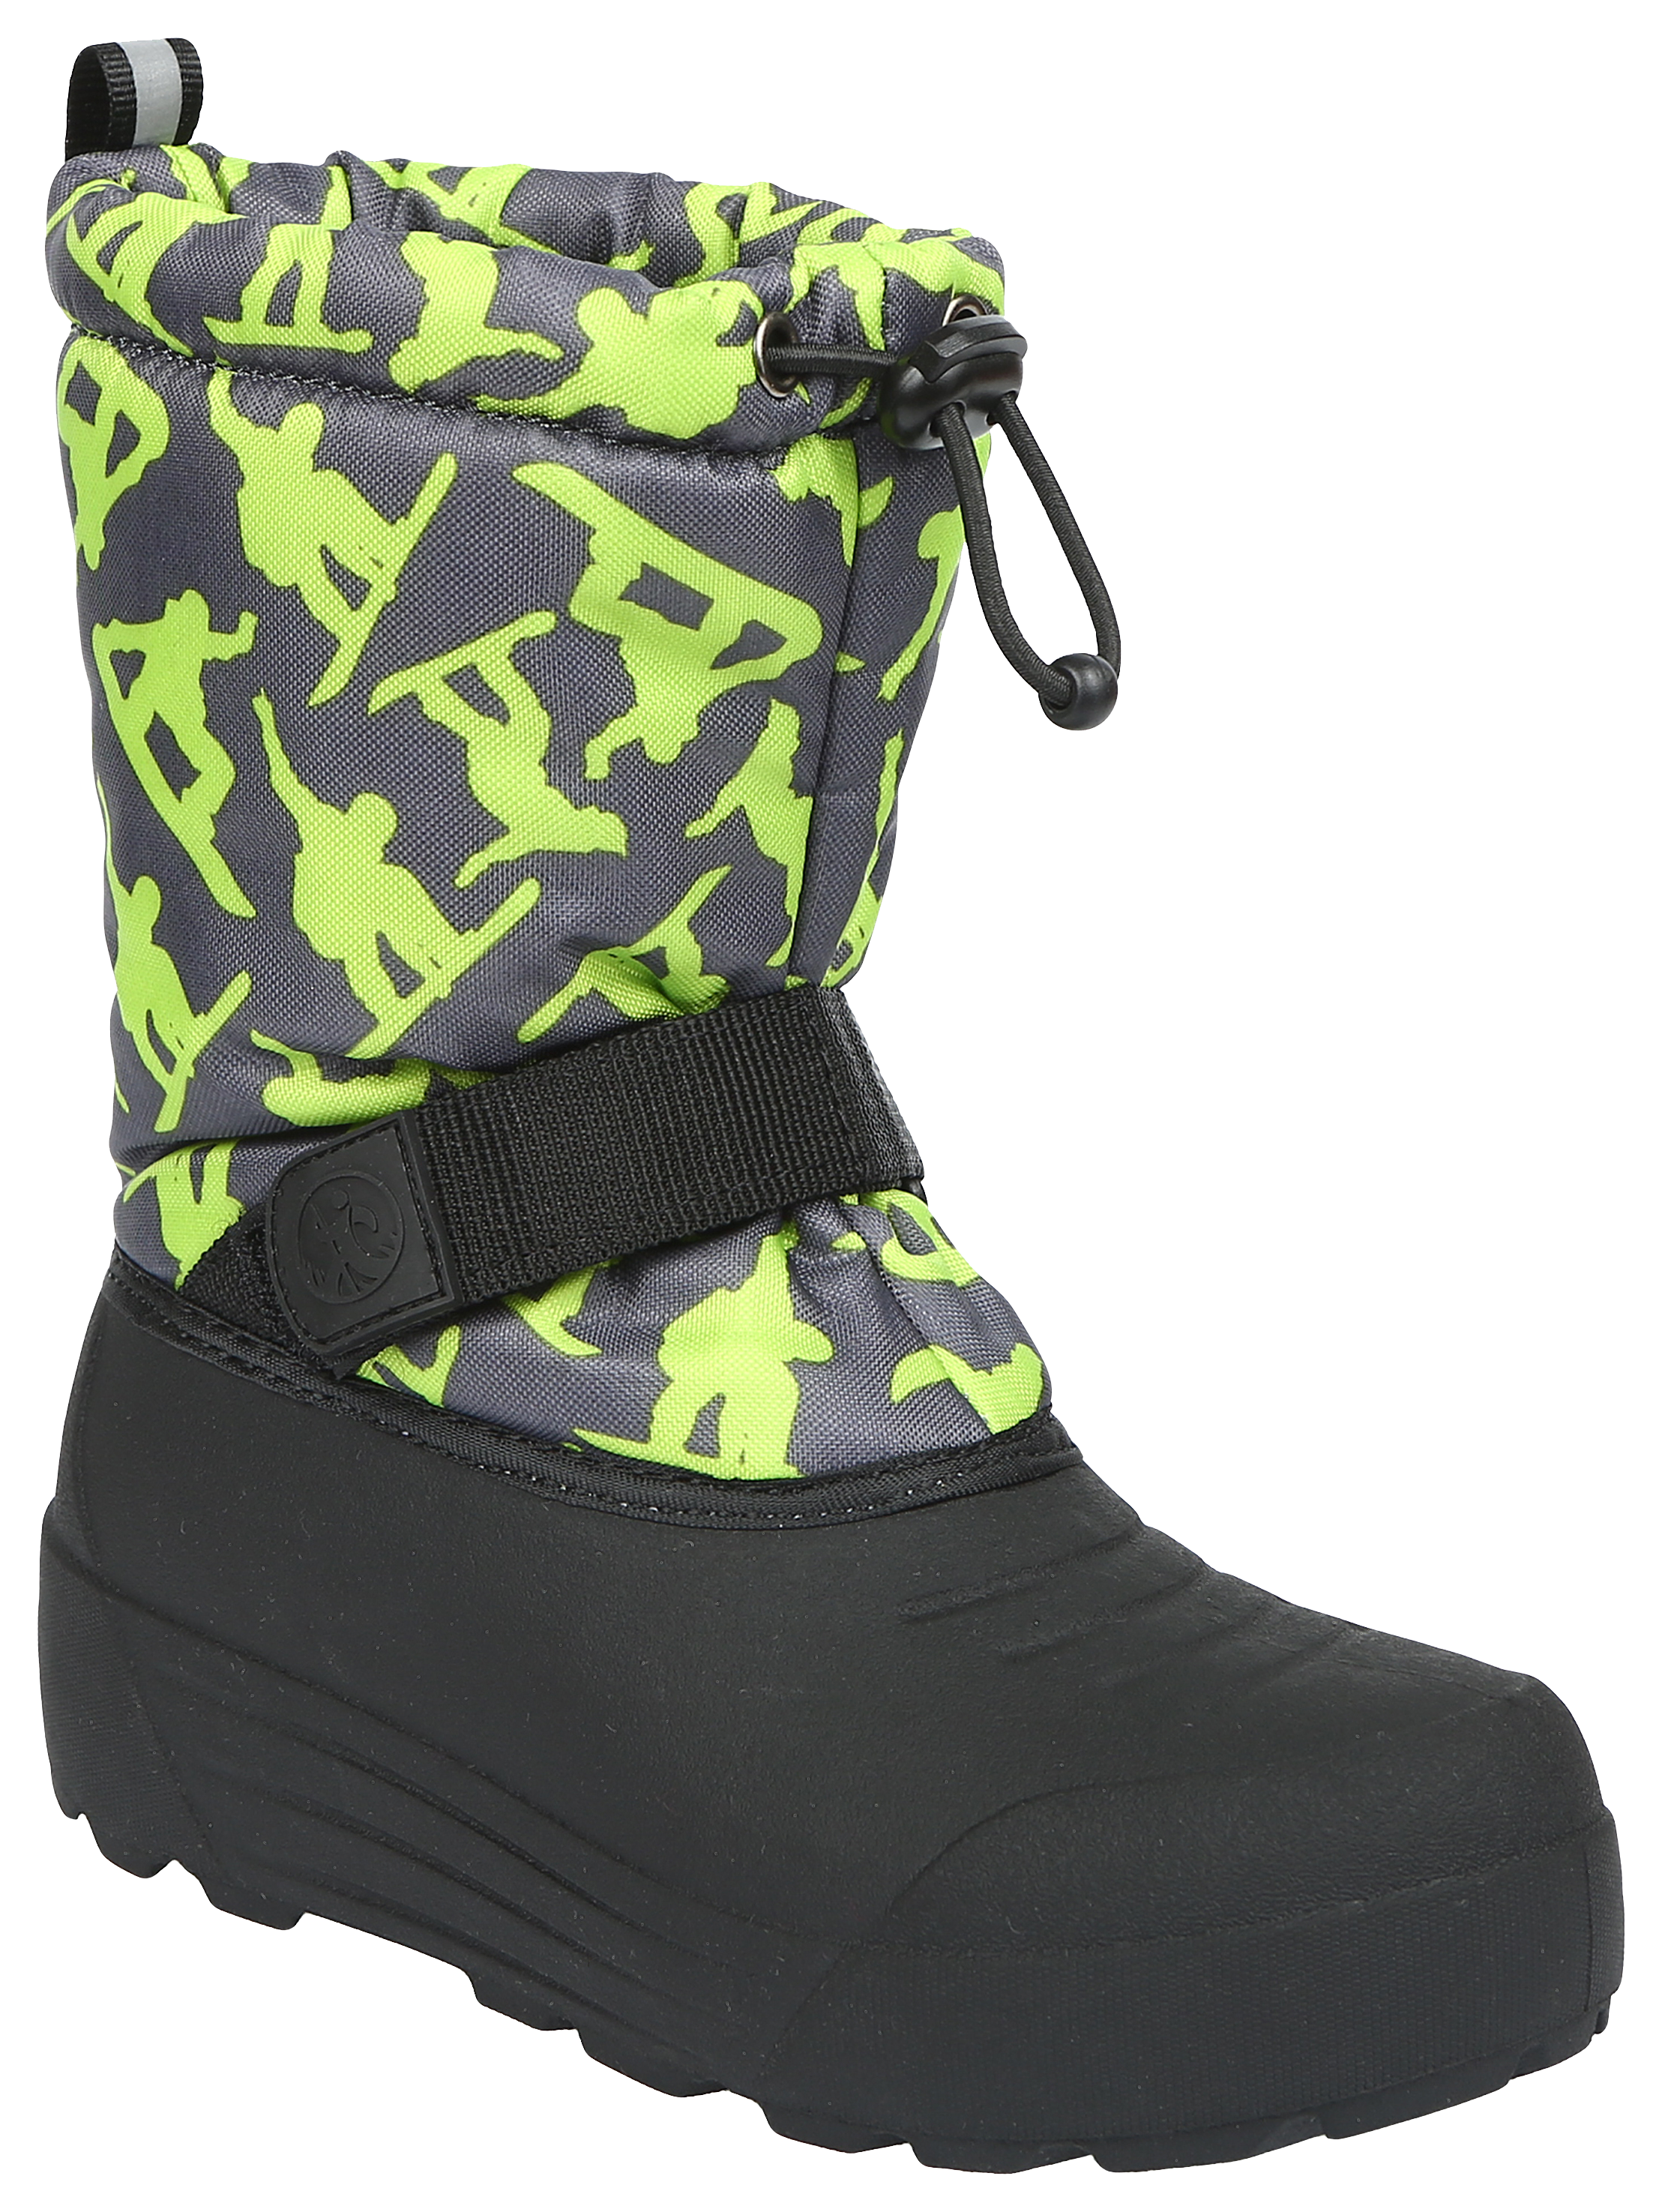 Northside Frosty Insulated Pac Boots for Kids - Dark Gray/Green - 6 Kids